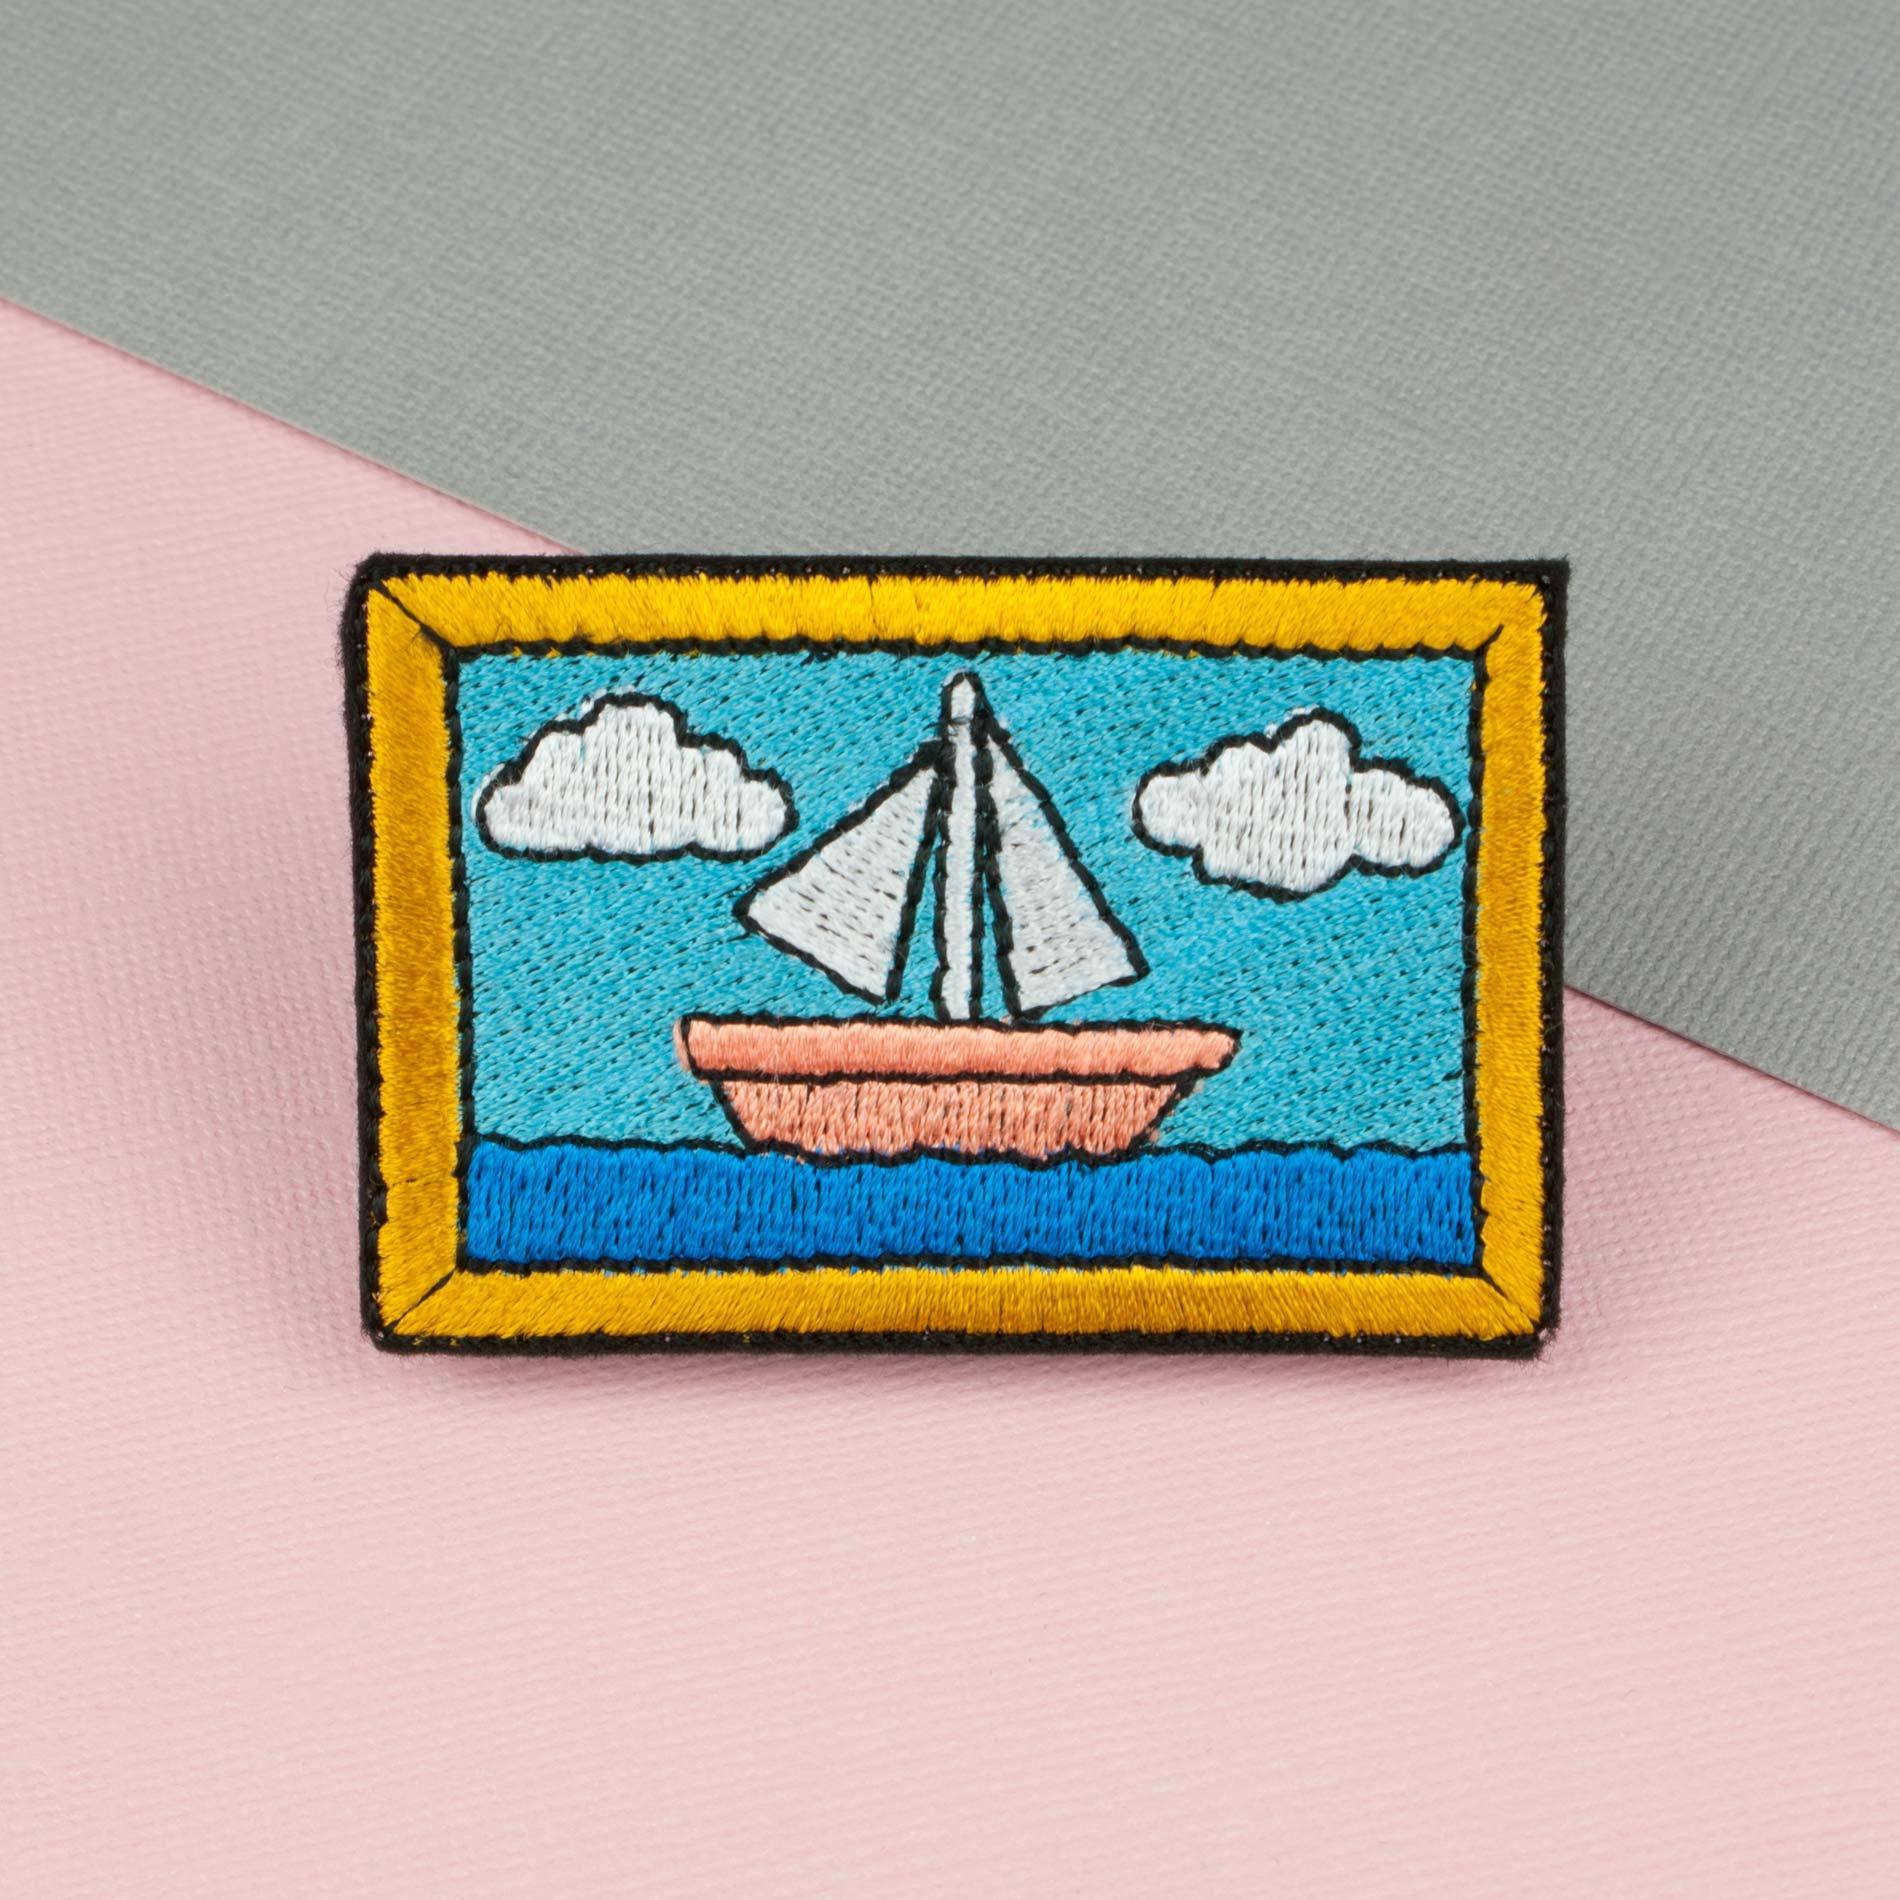 1900x1900 Simpsons Boat Painting Iron On Patch - The Simpsons Sailboat Painting